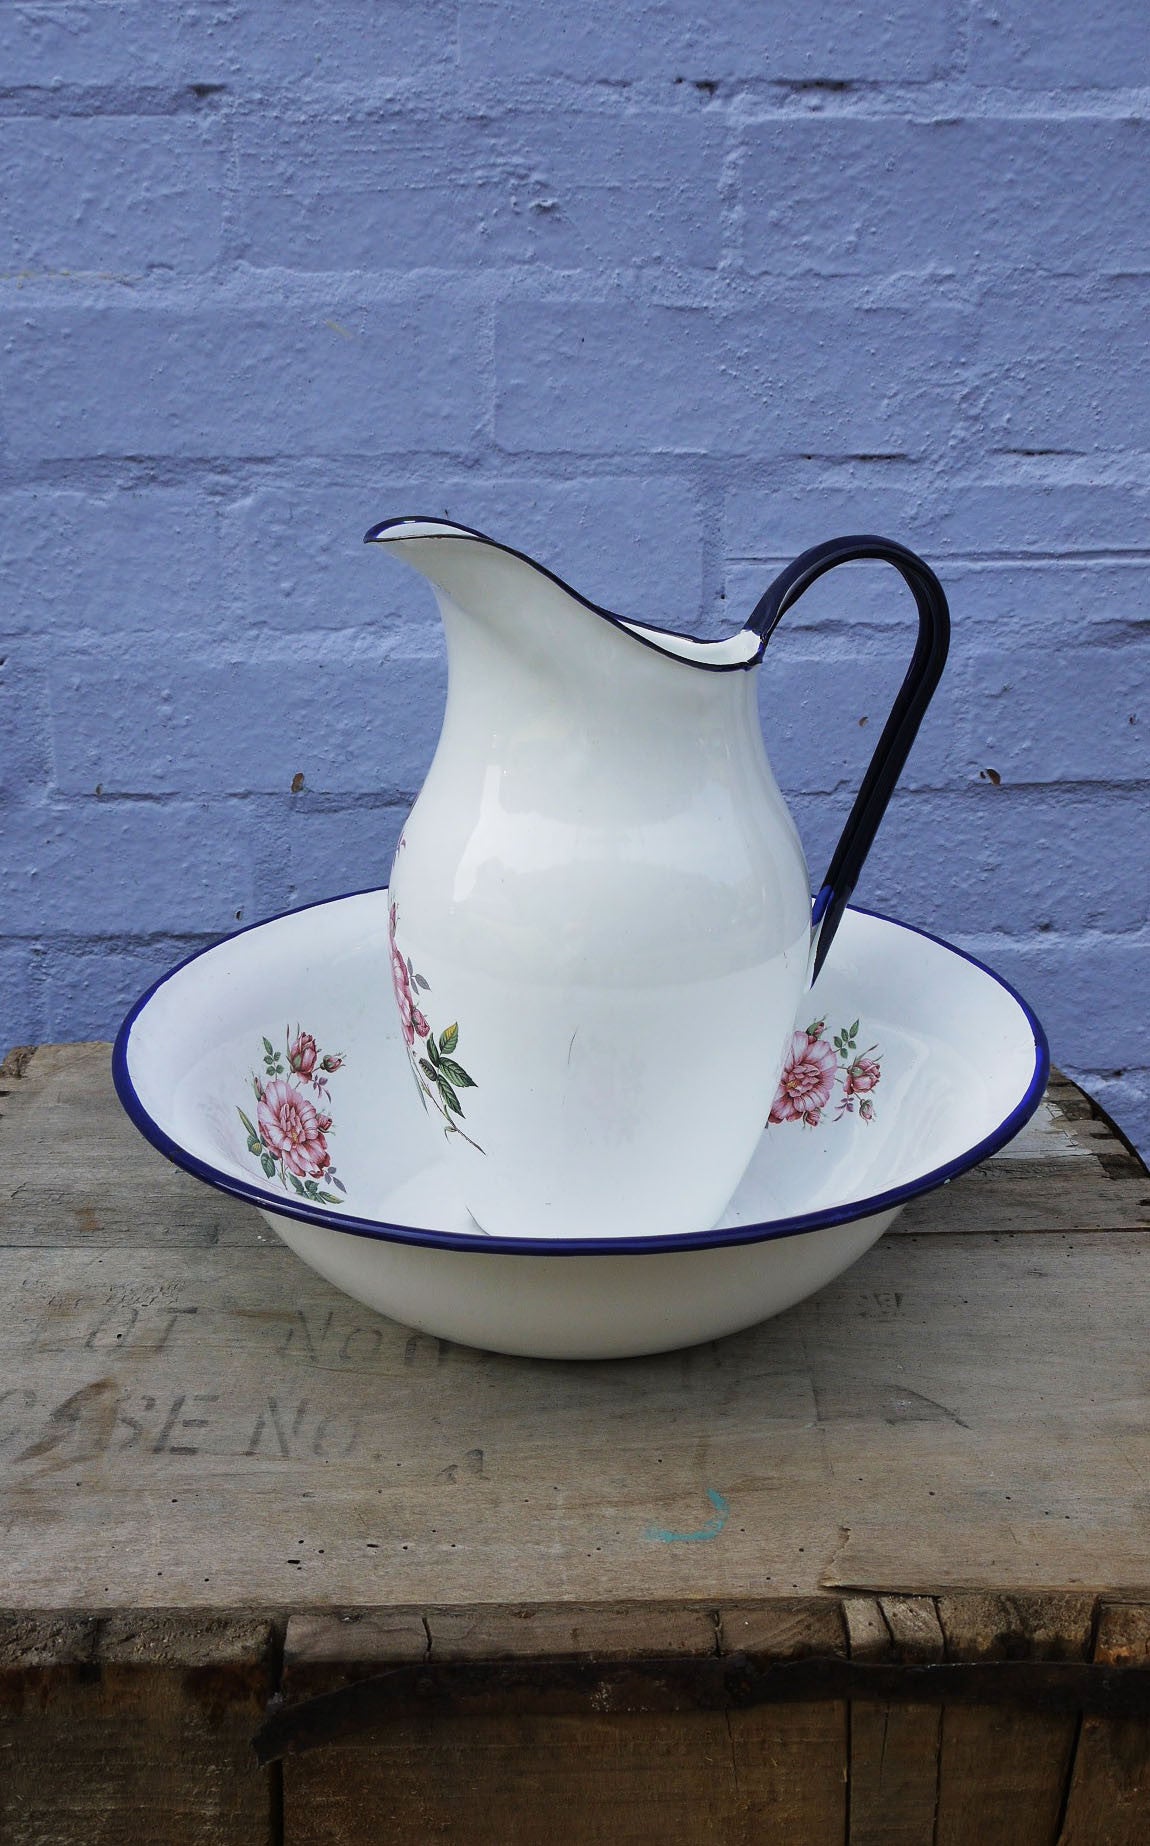 vintage enamel basin and pitcher in  Blue and White with a pretty floral design